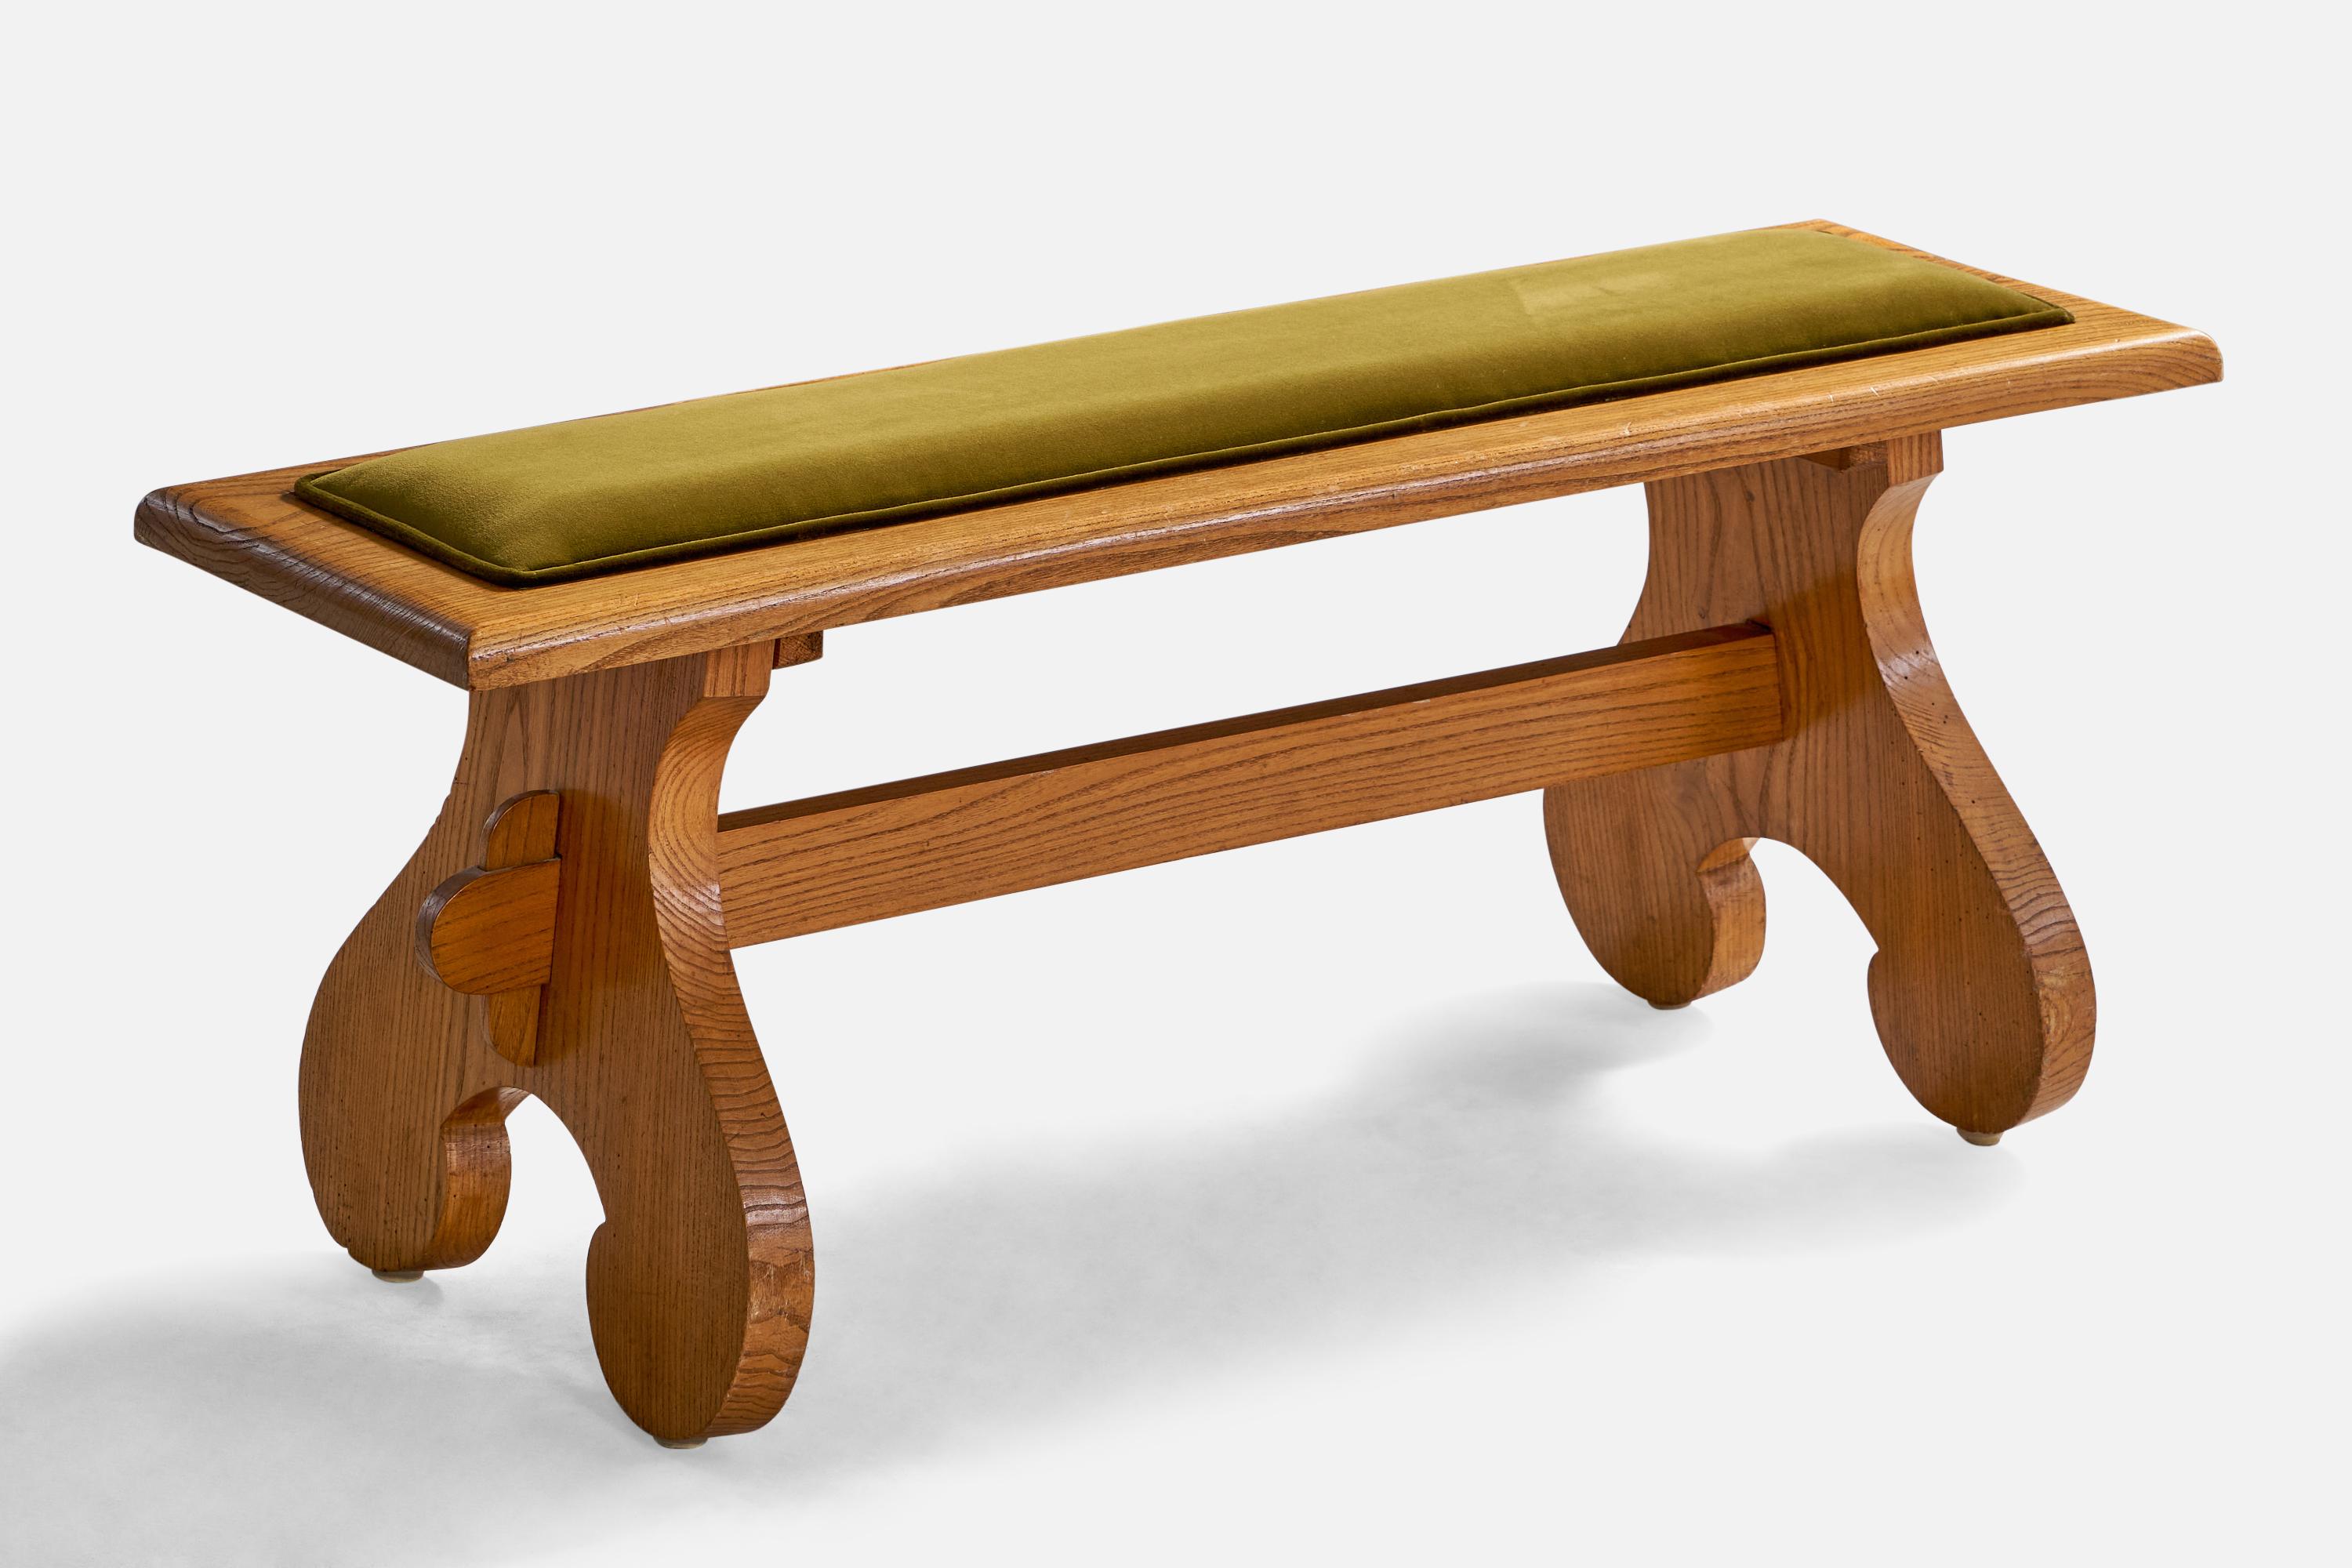 A pine and green velvet fabric bench designed and produced in Sweden, c. 1940s.

Seat height: 18”